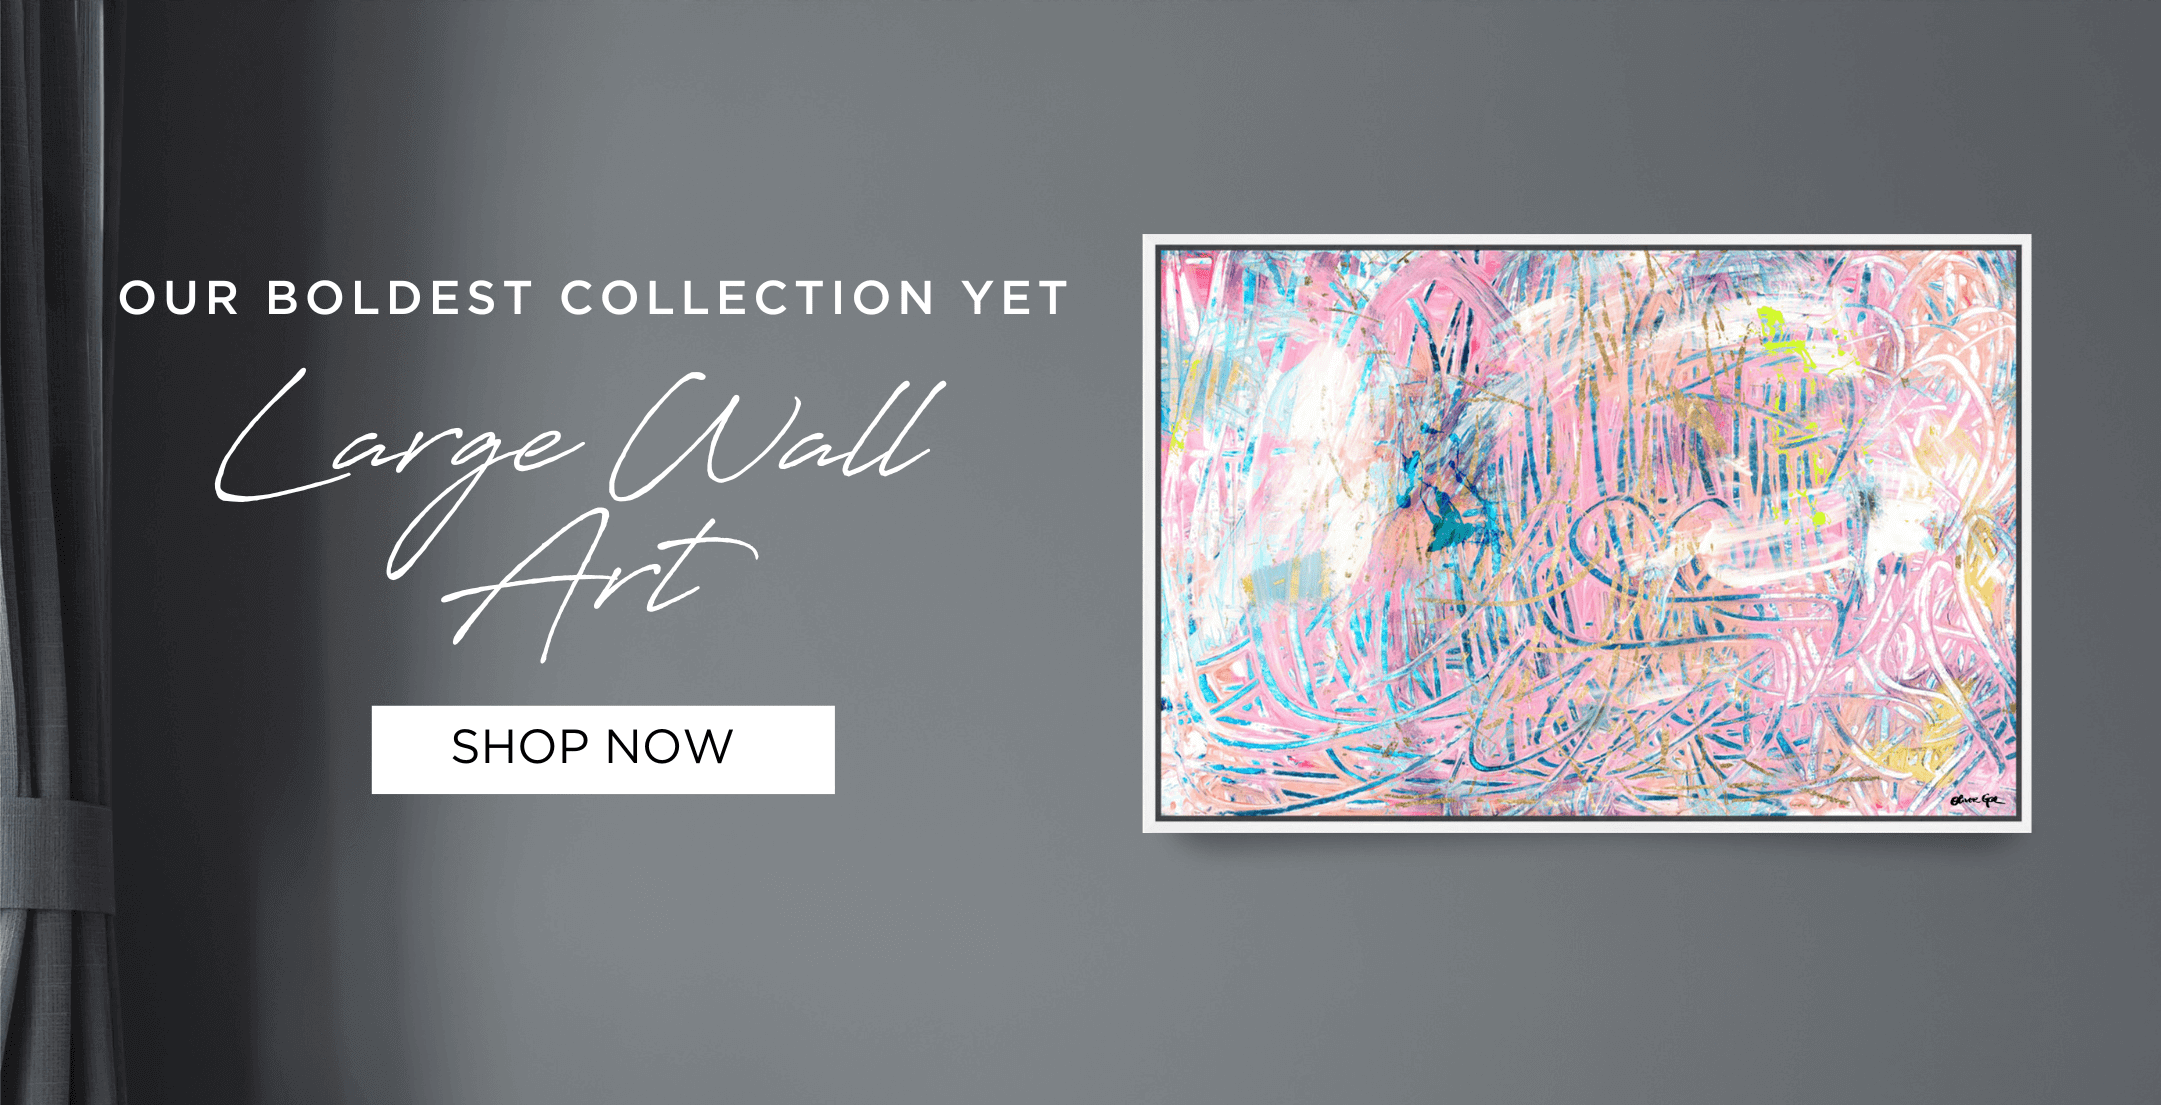 Our Boldest Collection Yet - Large Wall Art - Shop Now